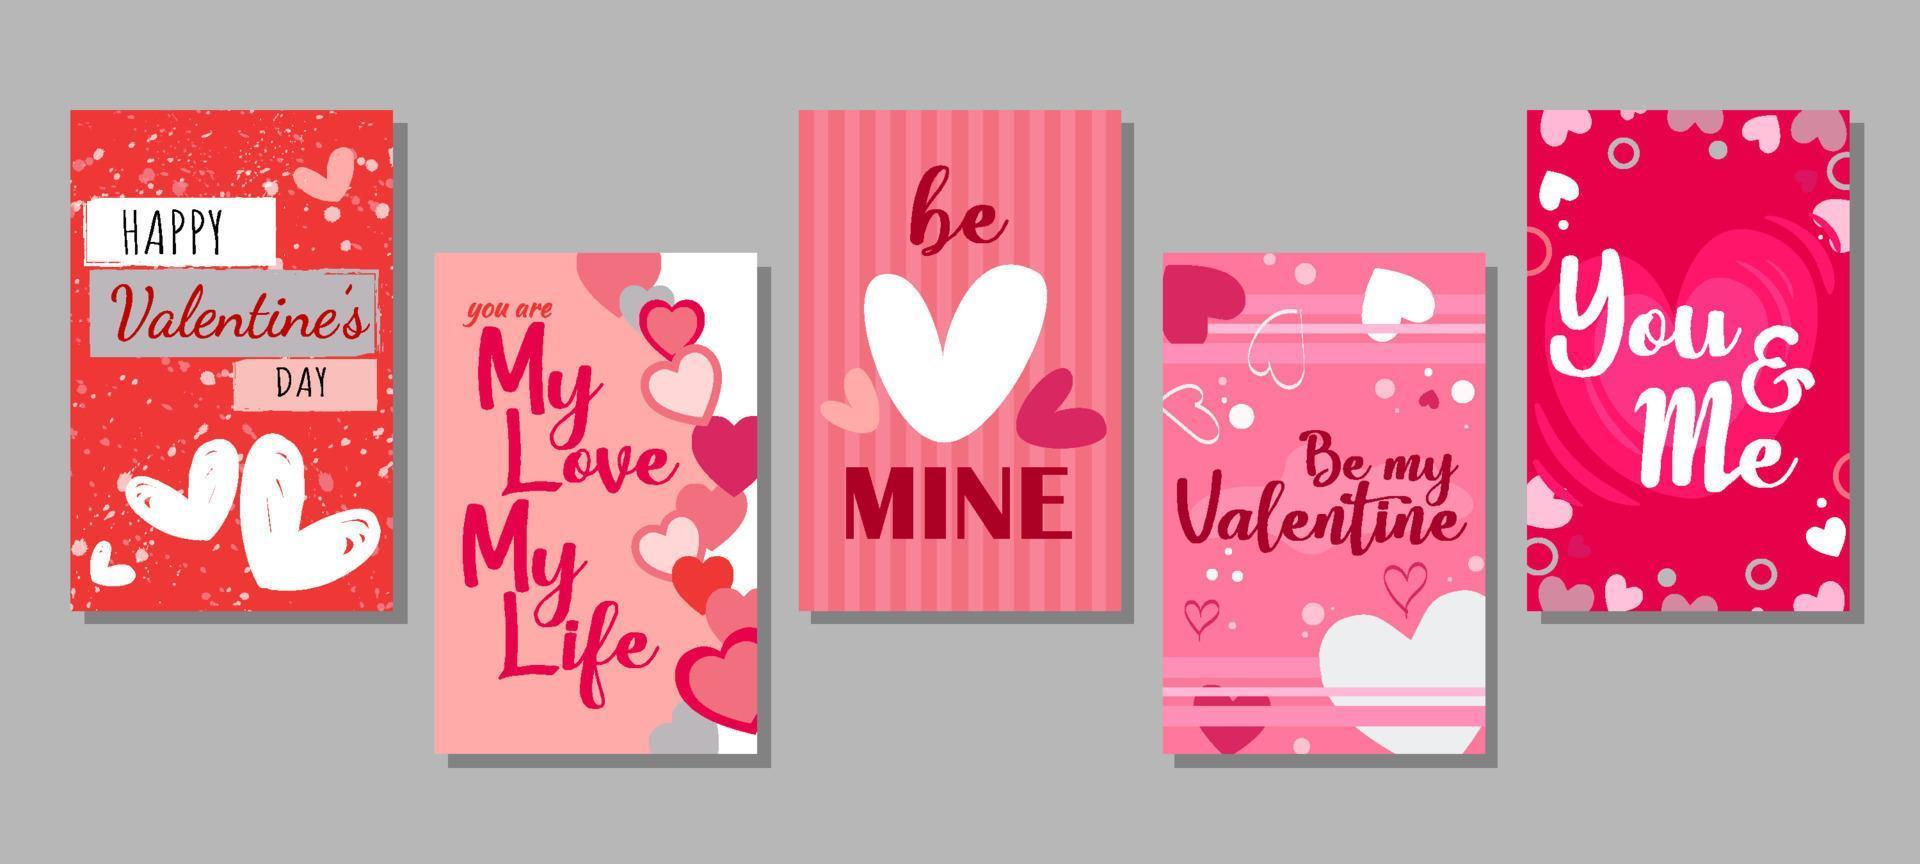 Happy Valentine's Day Card Collection vector